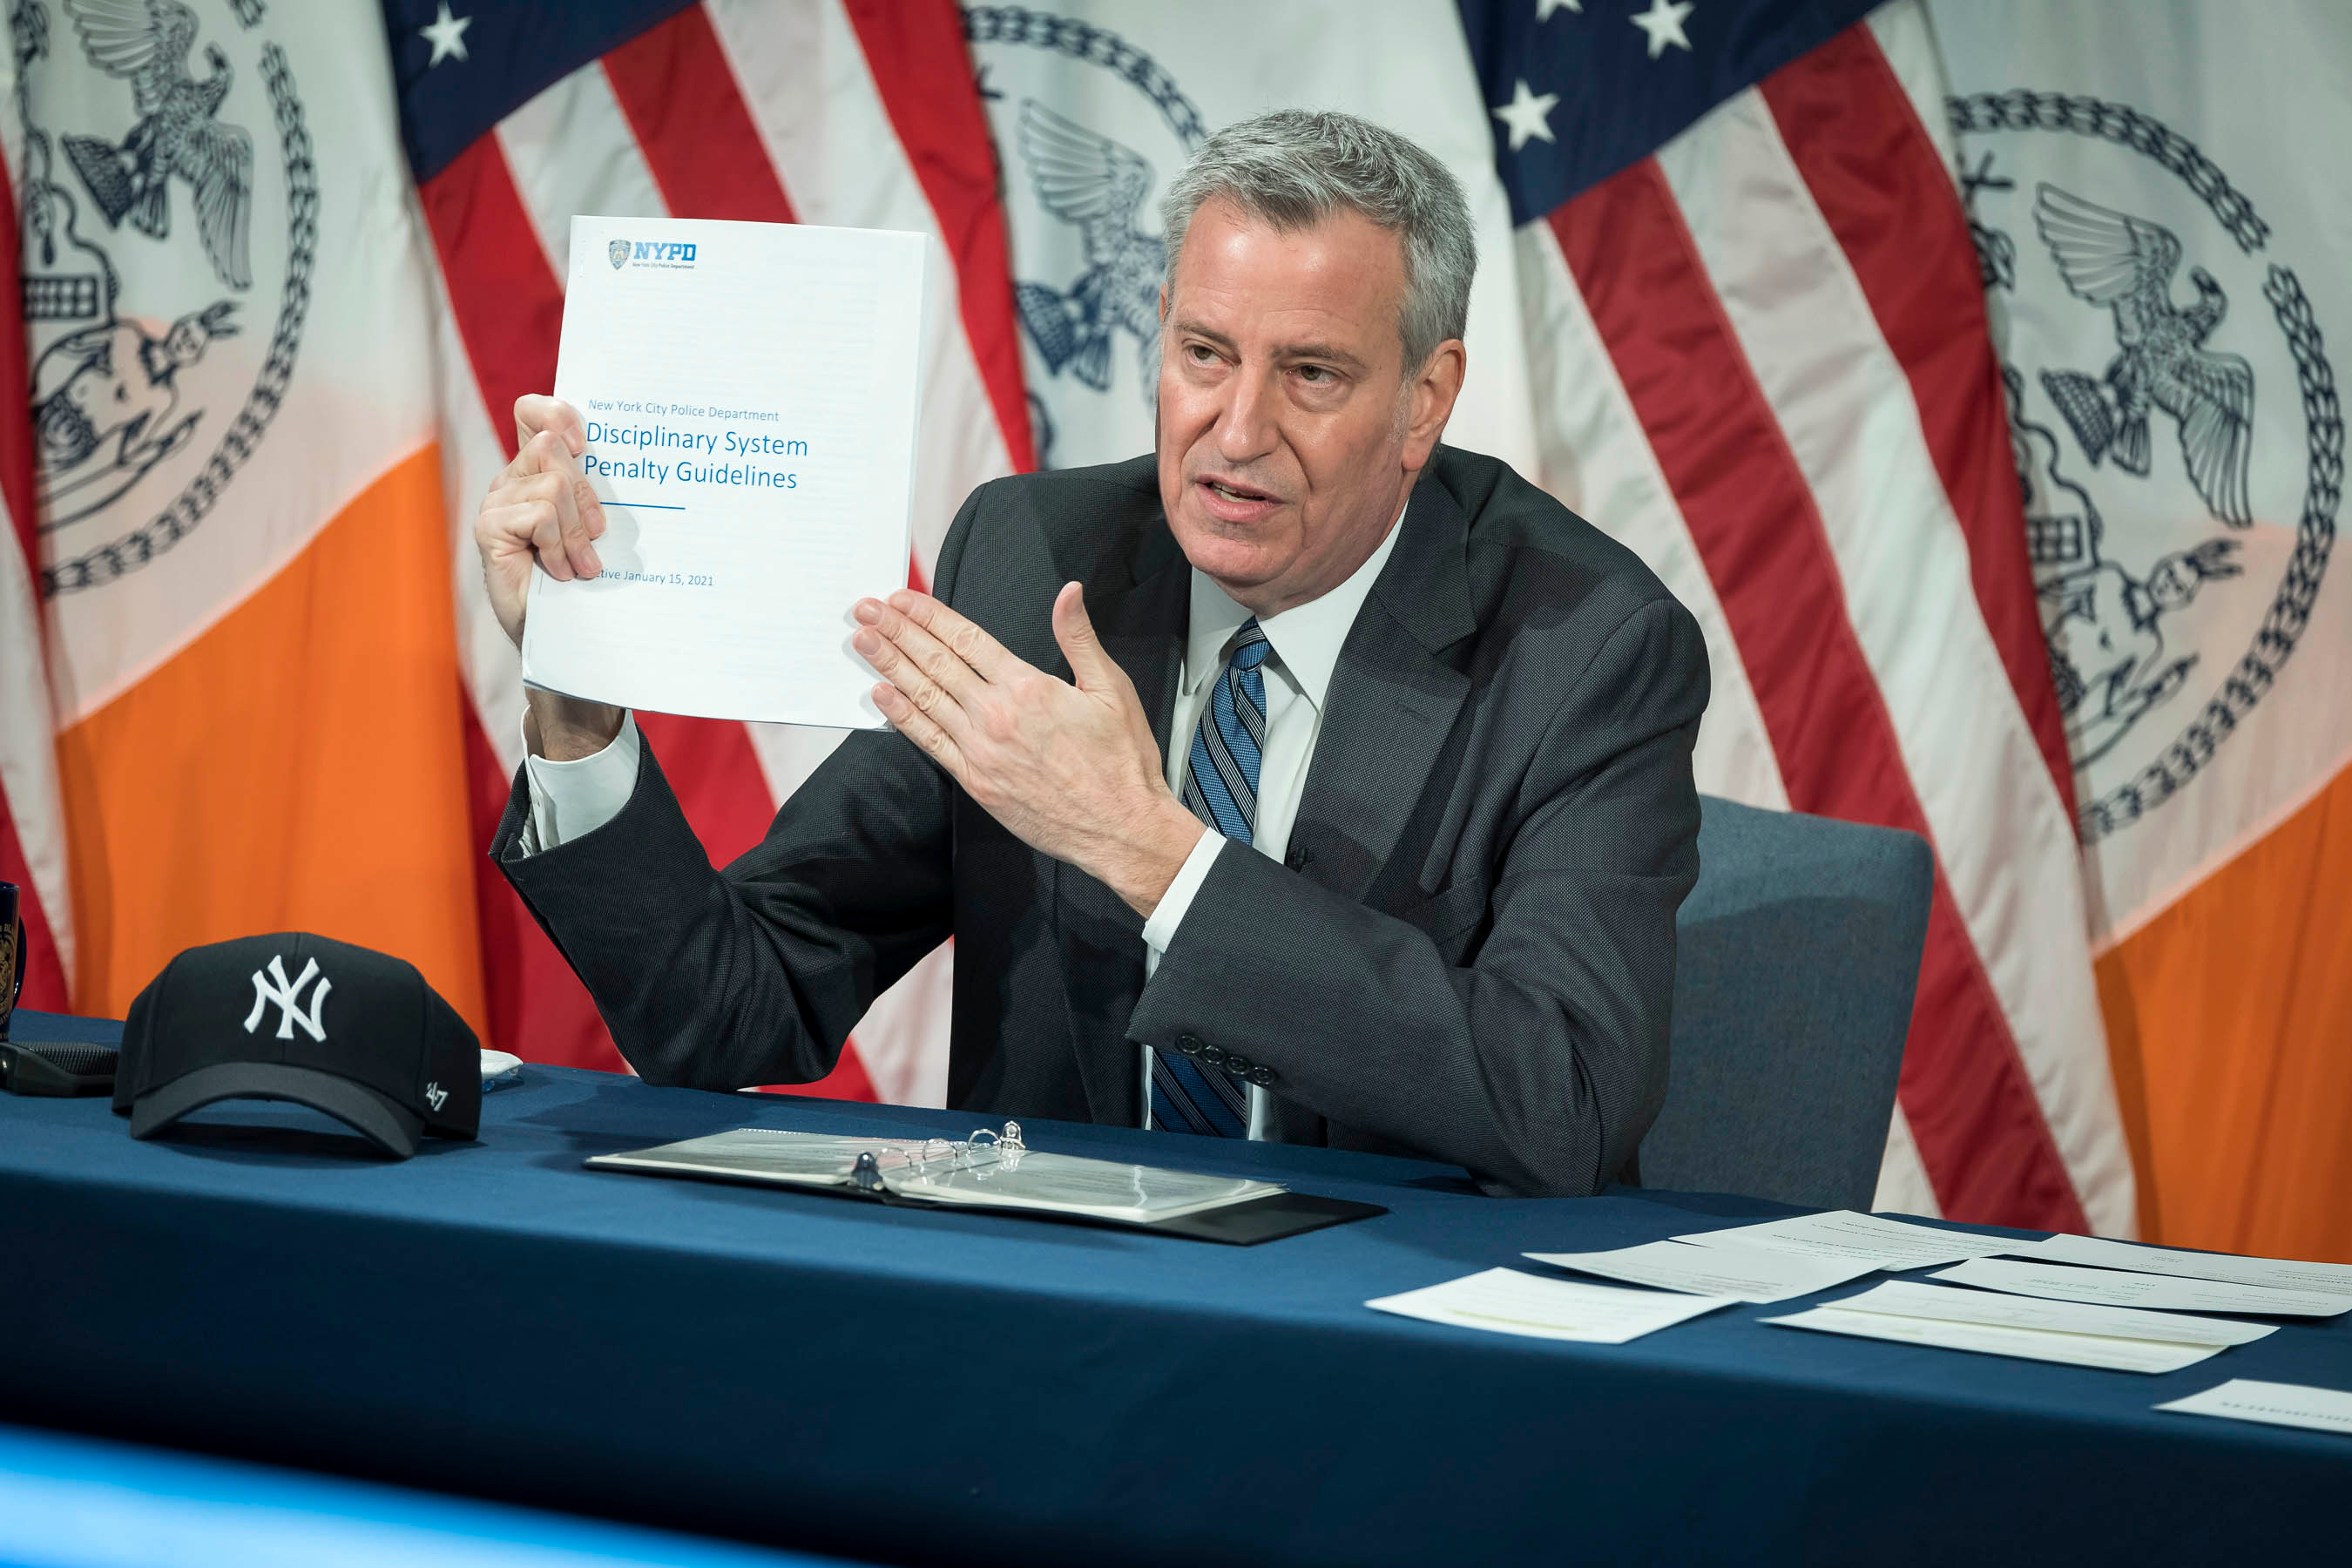 Mayor Bill de Blasio speaks at City Hall about new NYPD disciplinary guidelines, Jan. 19, 2021.